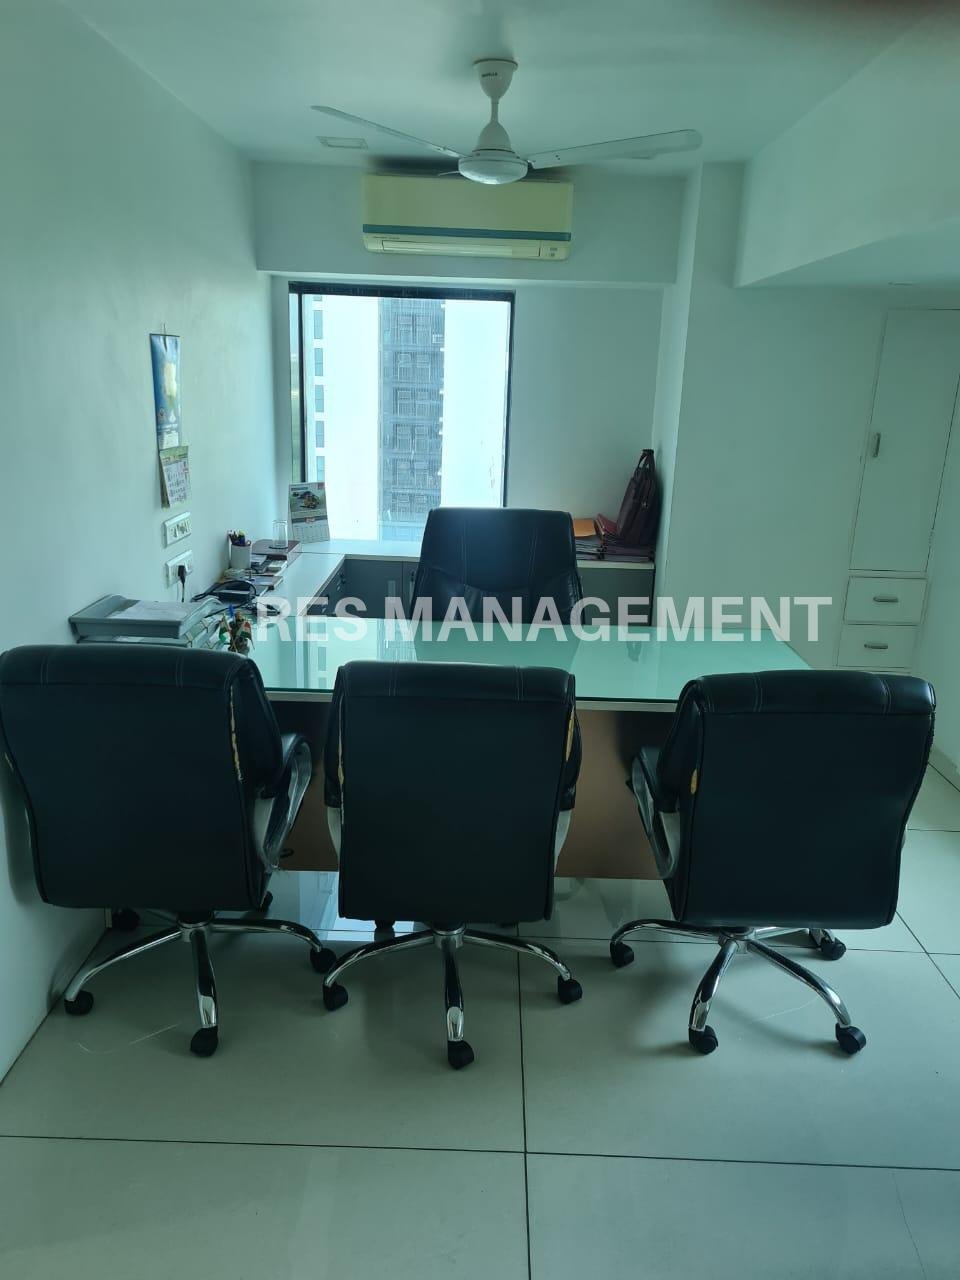 1227ft office for rent iscon ambli road 2 cabin conference 4 seating